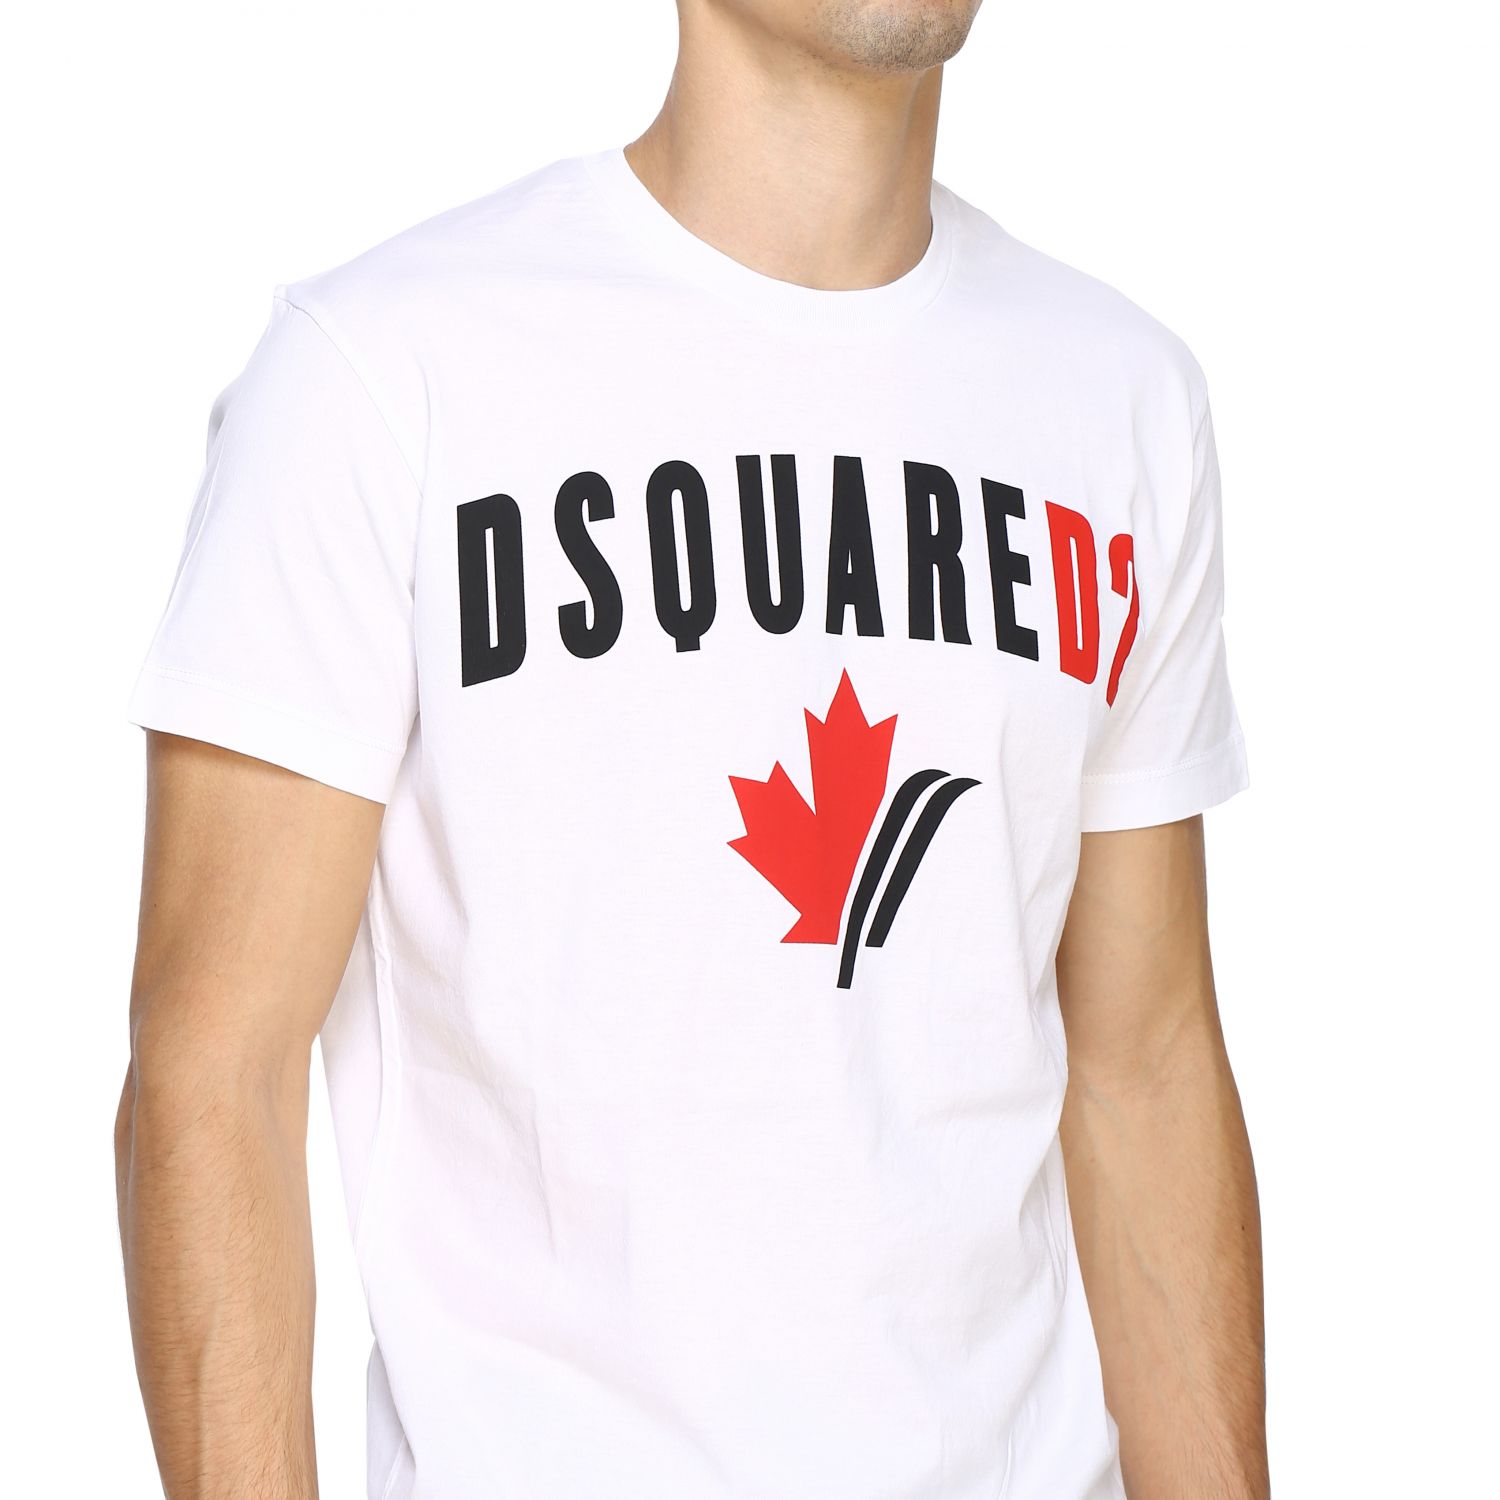 dsquared pull feuille